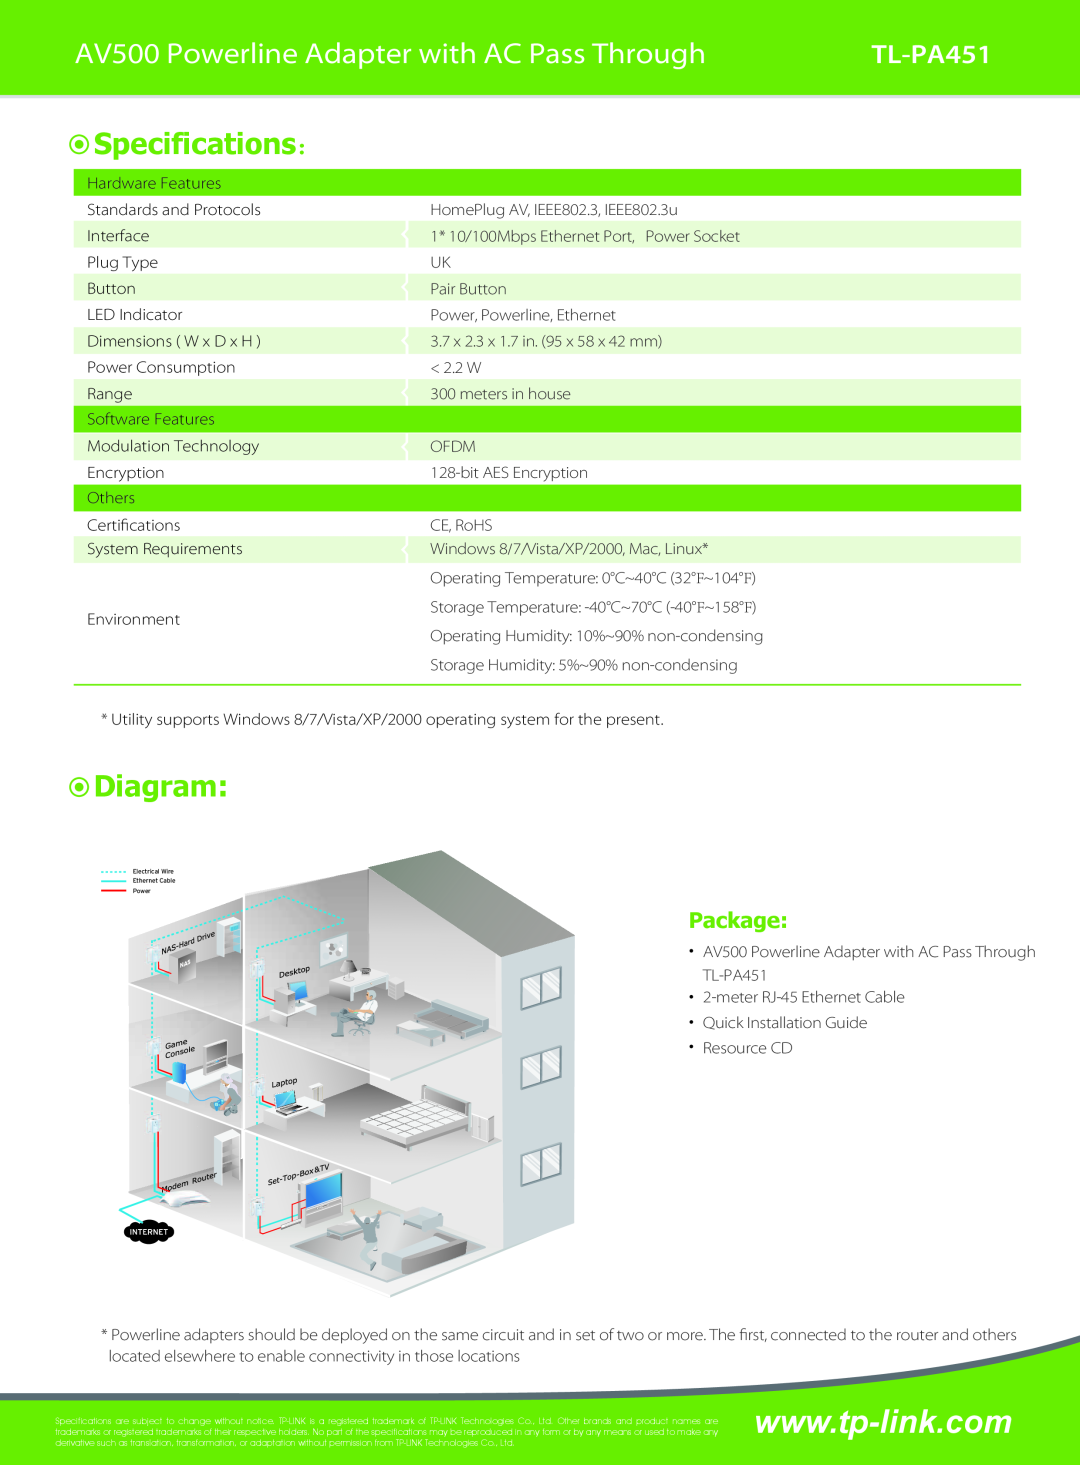 TP-Link TL-PA451 manual Specifications：, Diagram, AV500 Powerline Adapter with AC Pass Through, Package 